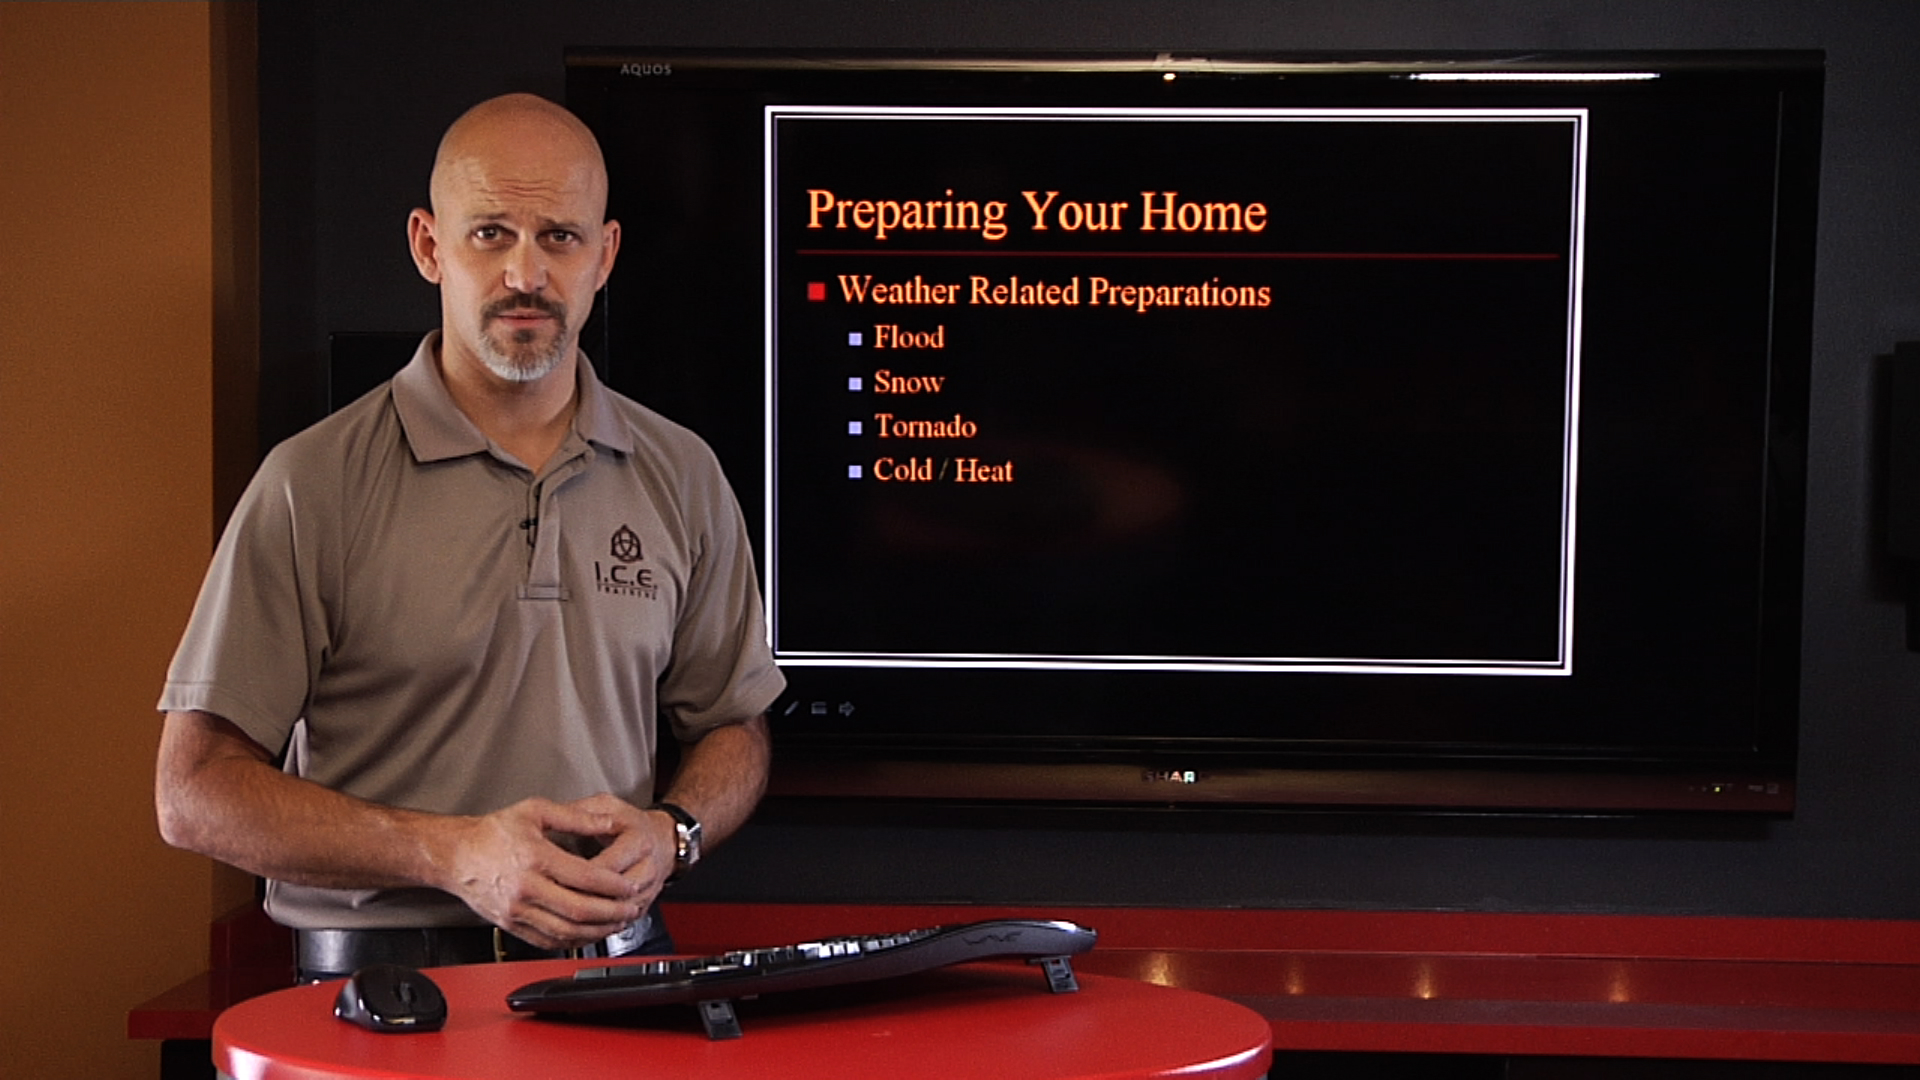 Man with a presentation about preparing your home for weather